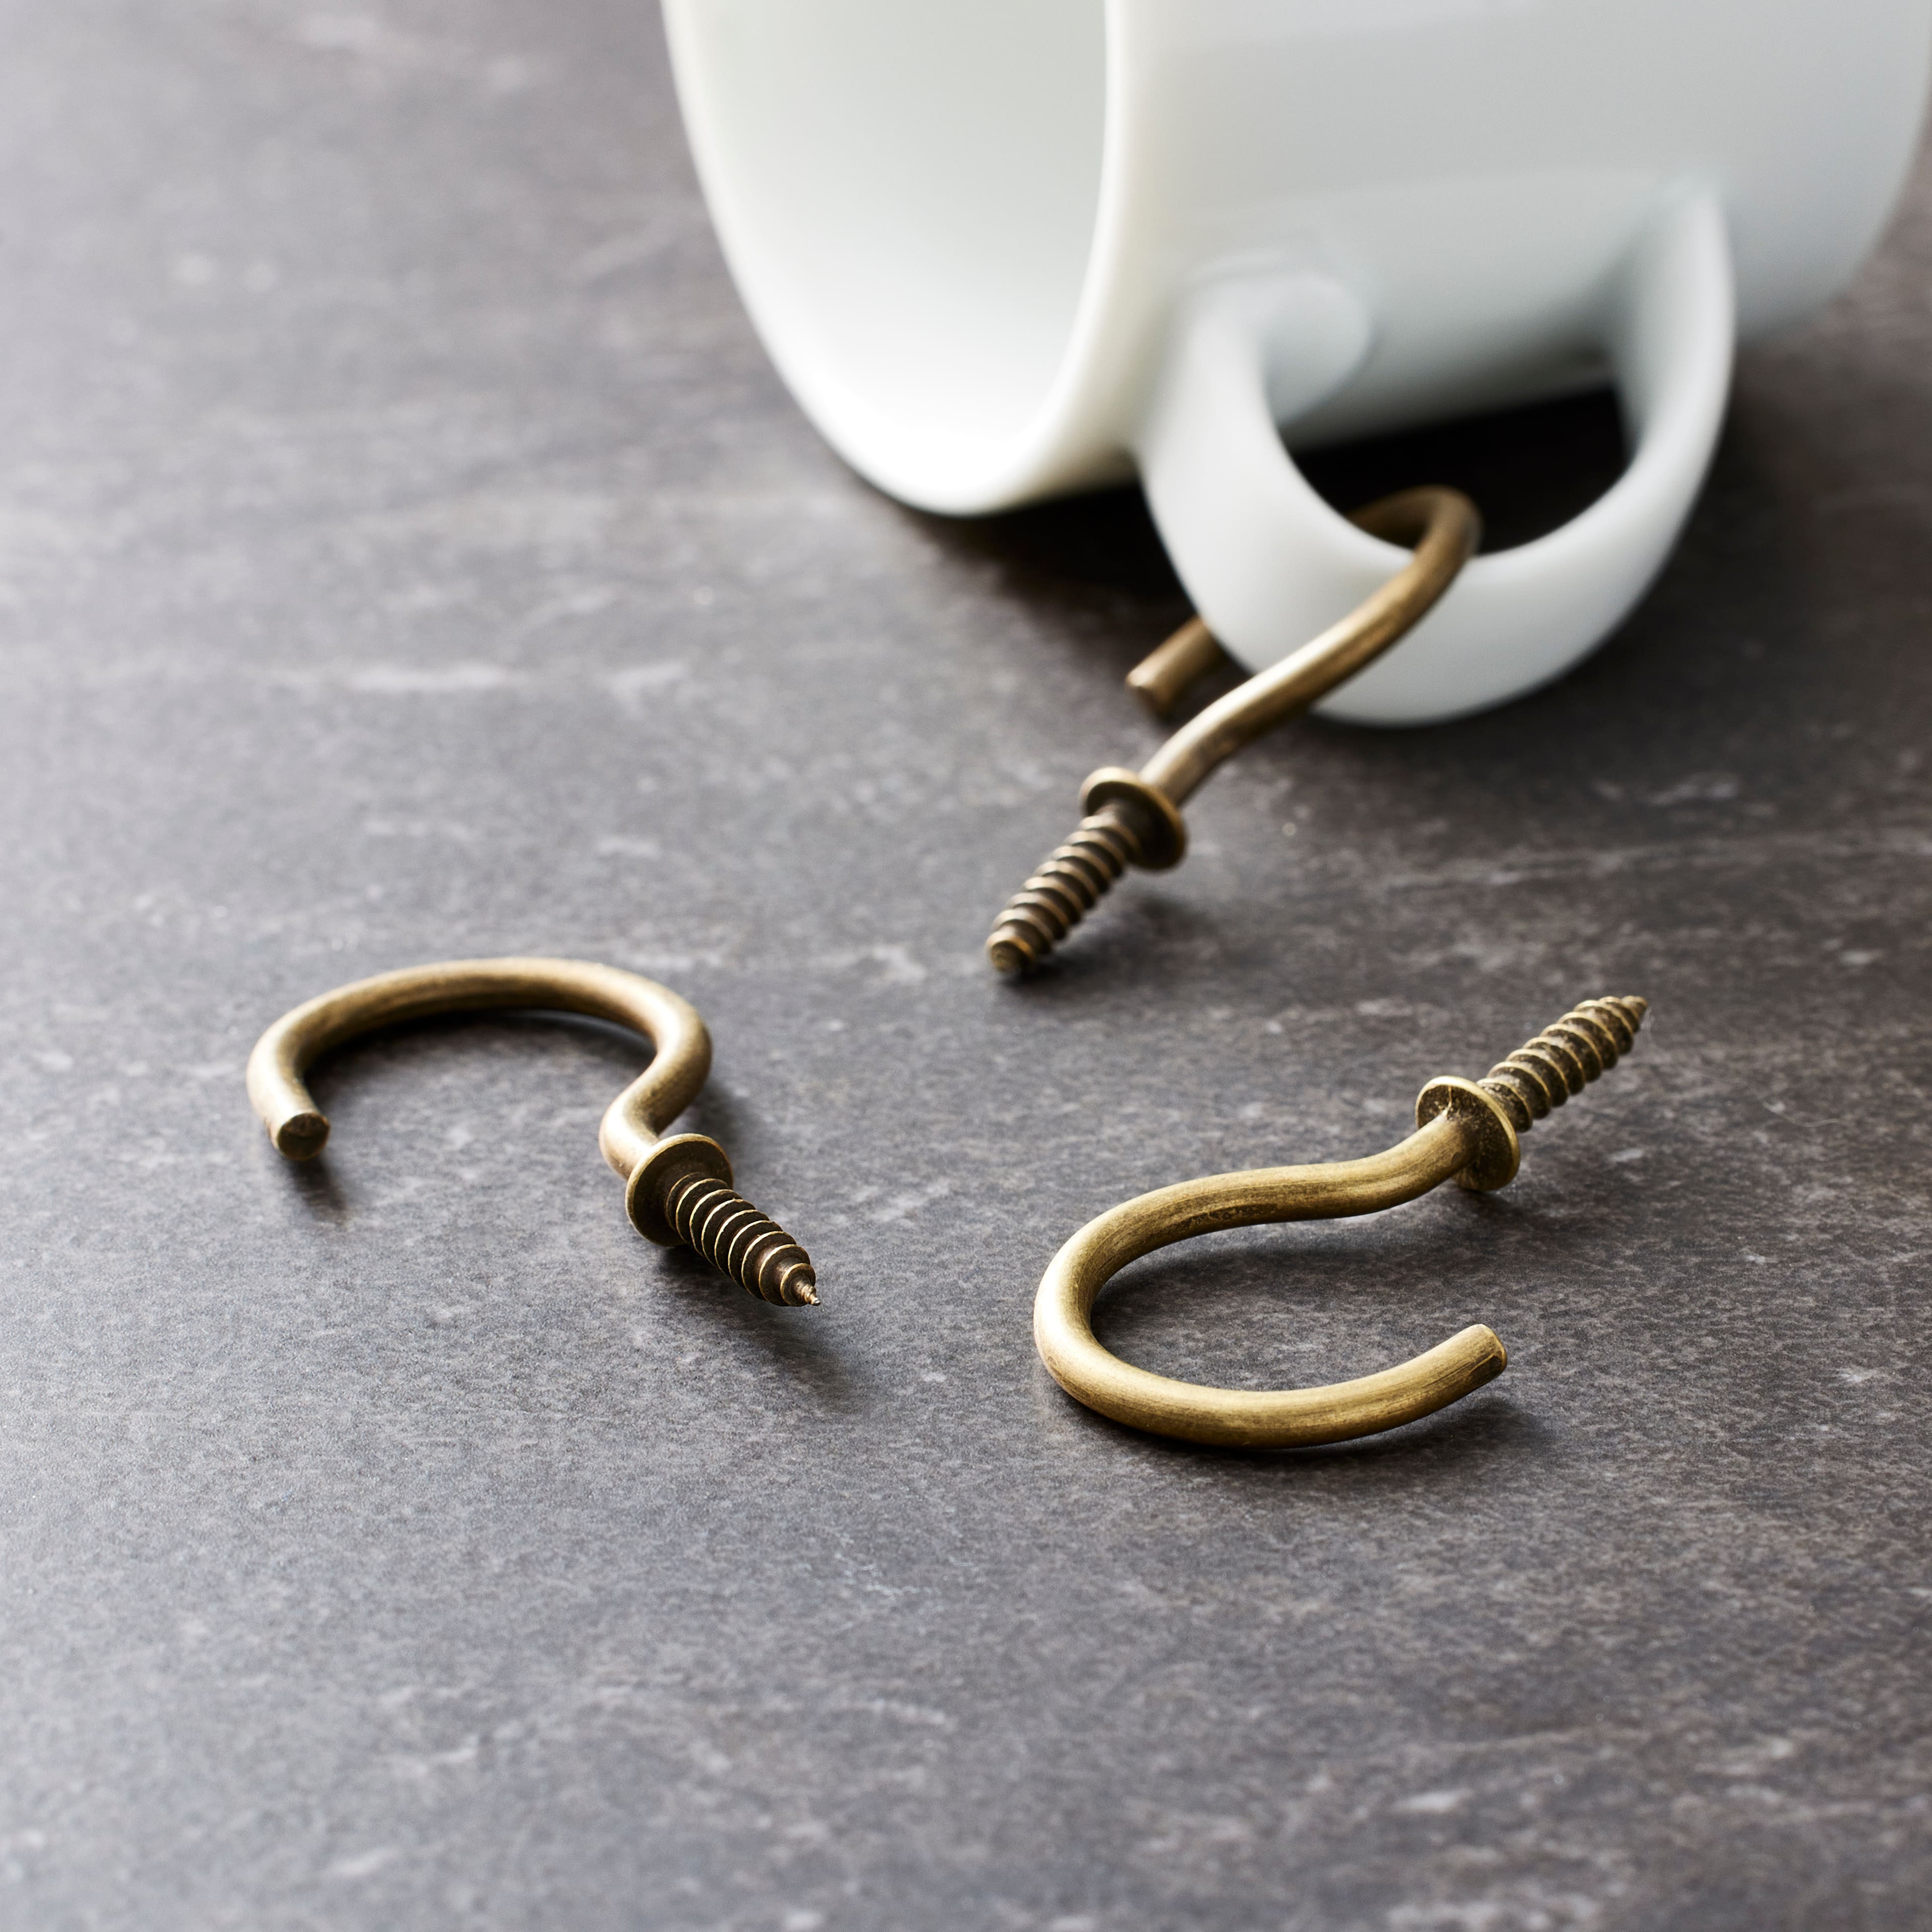 Easyfix Electro Brass Square Cup Hooks x 10 Pack - Screwfix